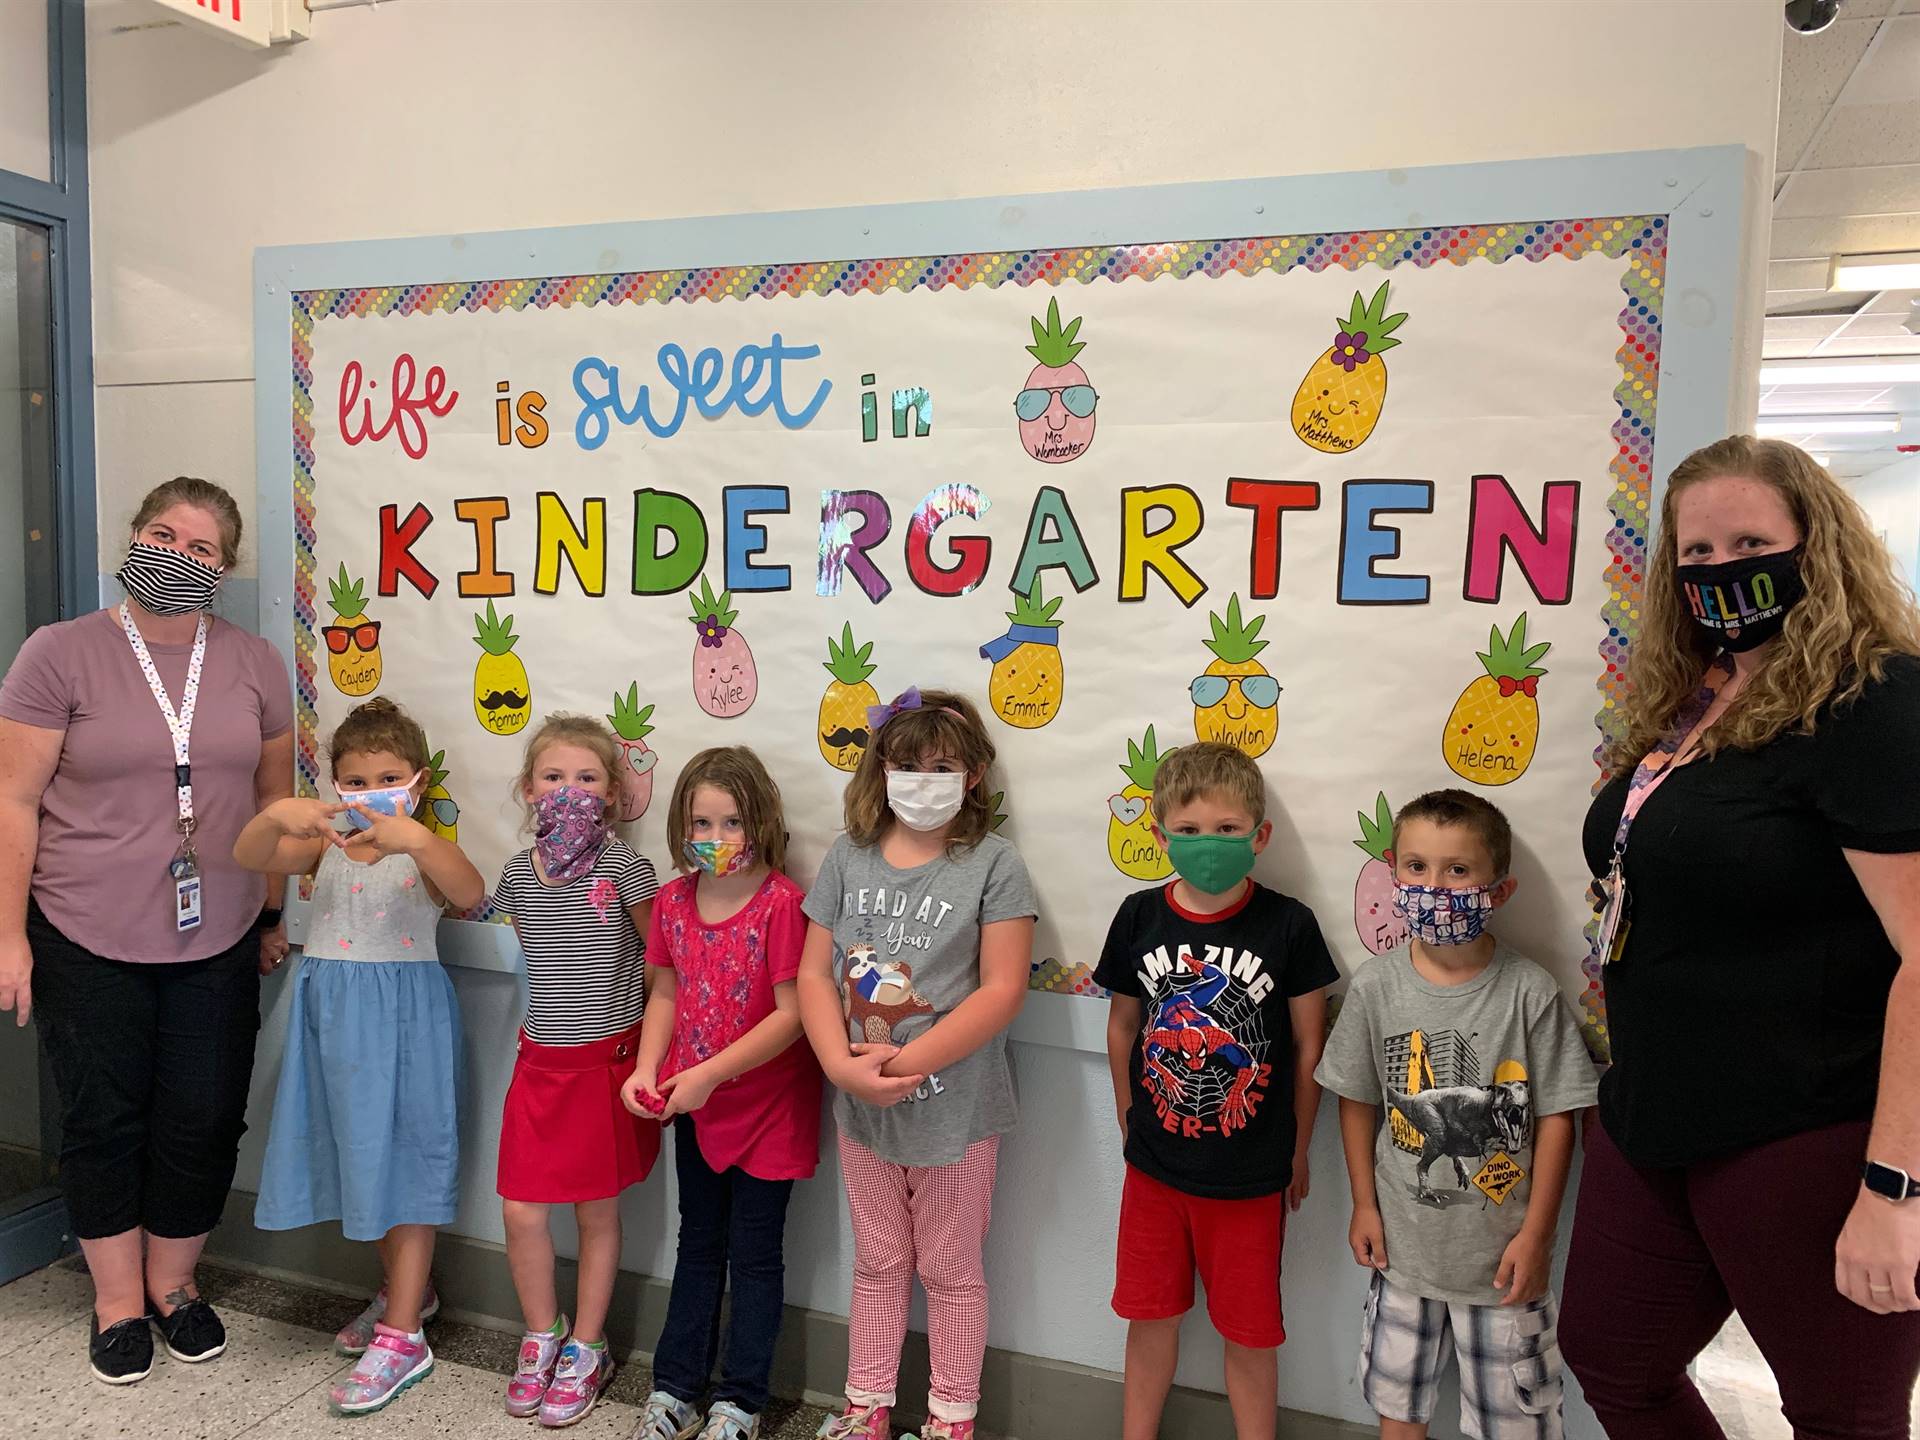 Students and staff by bulletin board that says. "Life is Sweet in kindergarten."